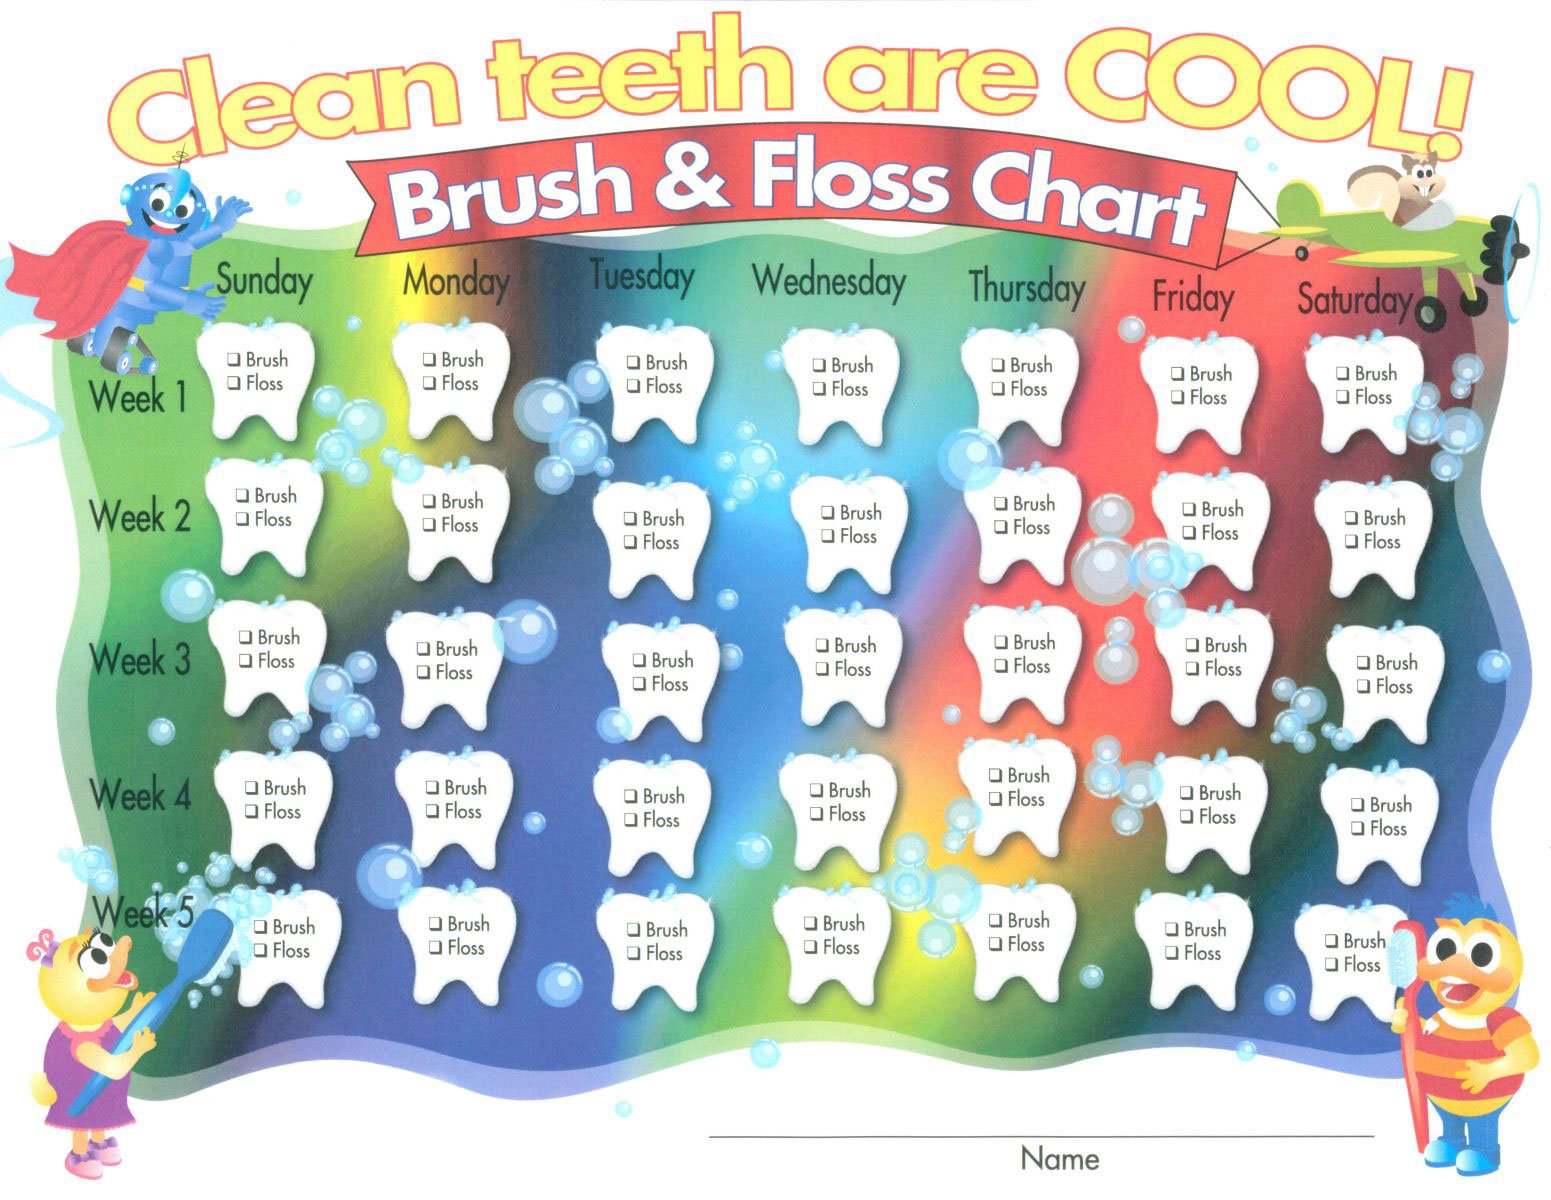 brush-and-floss-daily